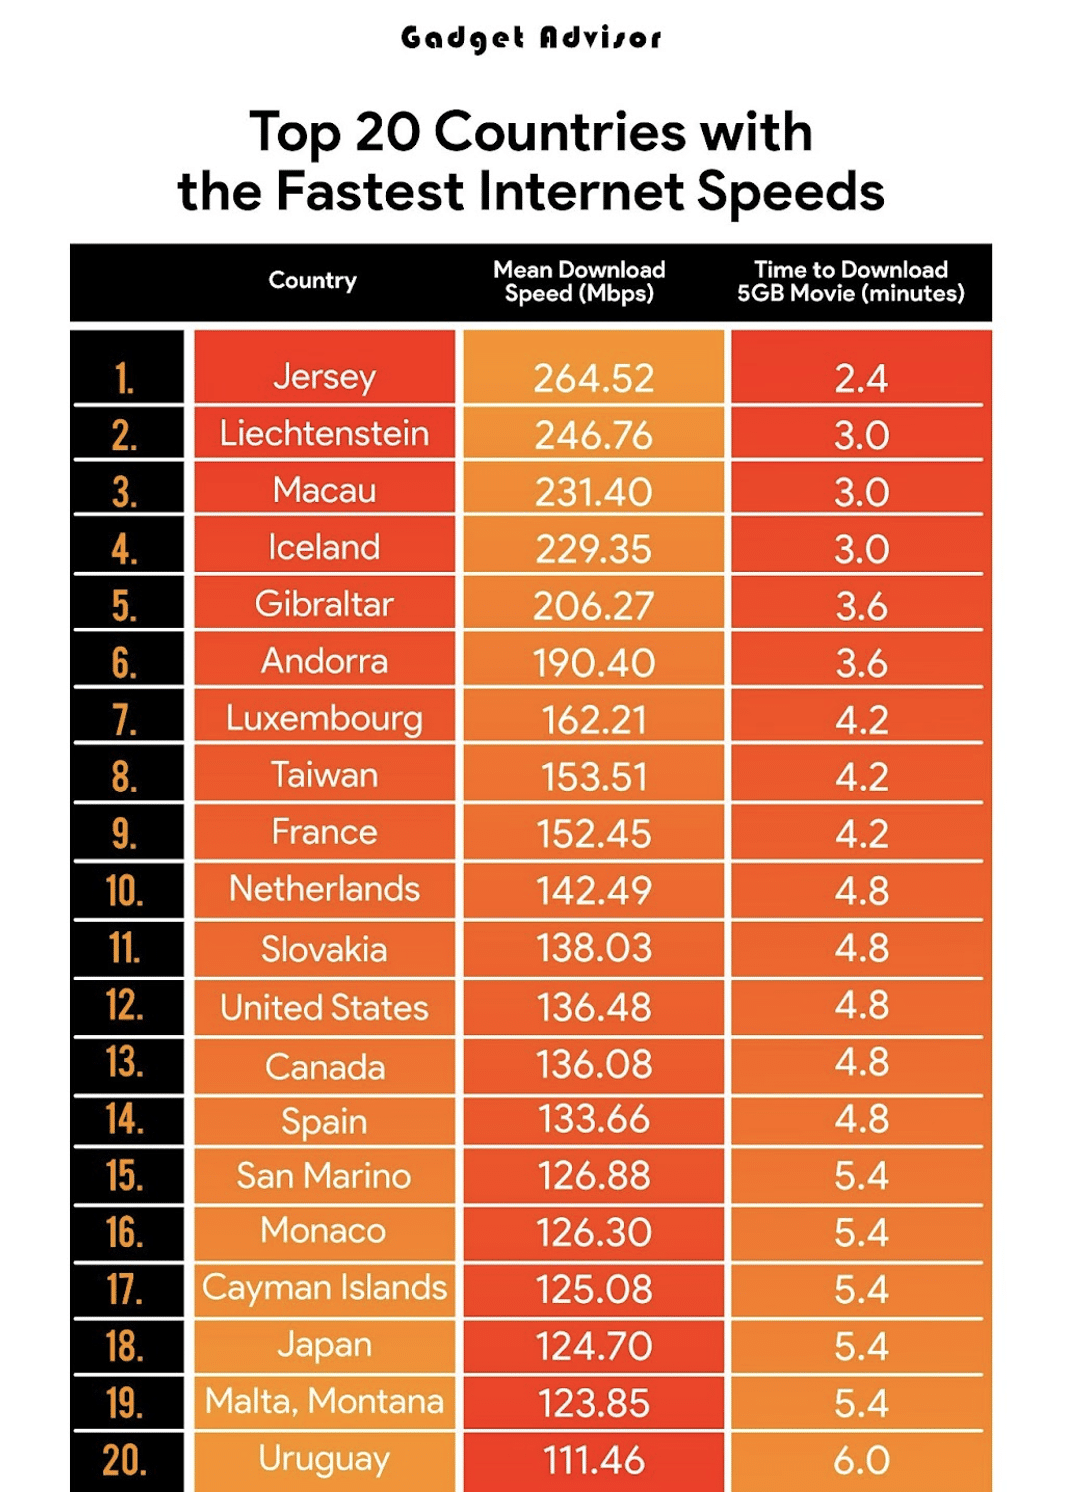 Top 20 Countries with the Fastest Internet Speeds